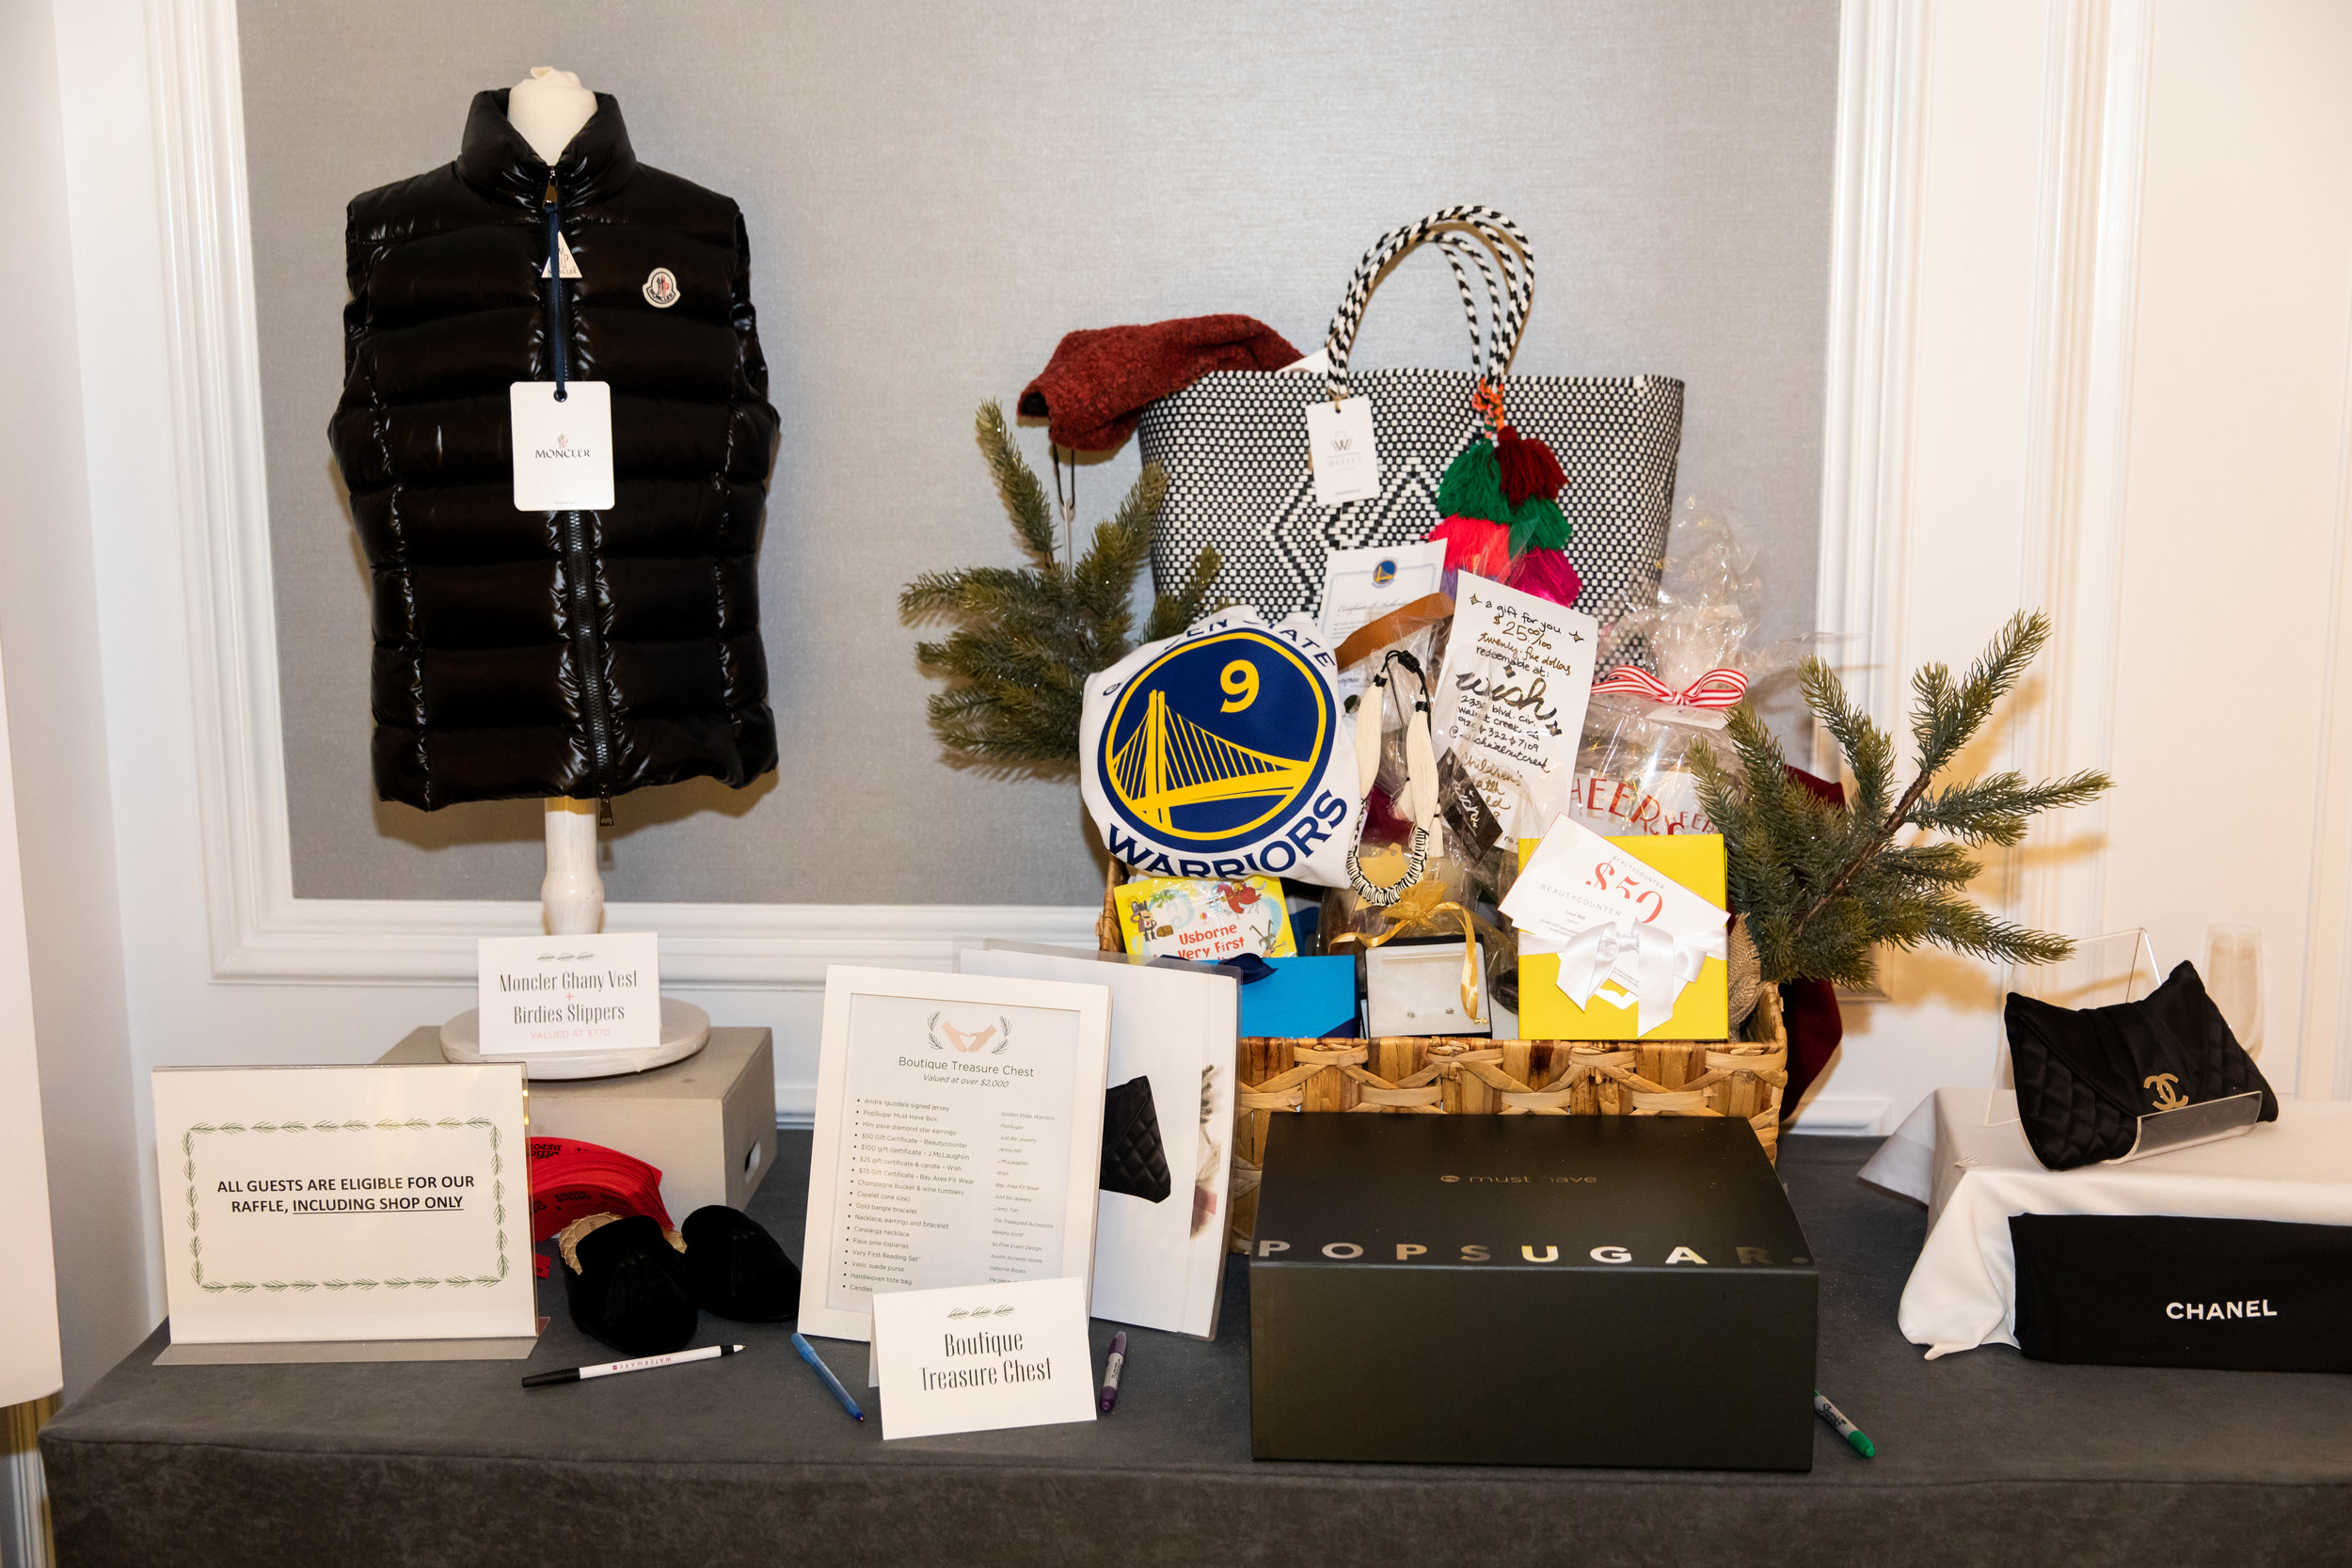 041_Catherine Hall Studios_CHG Holiday Boutique and Luncheon December 2018.jpg